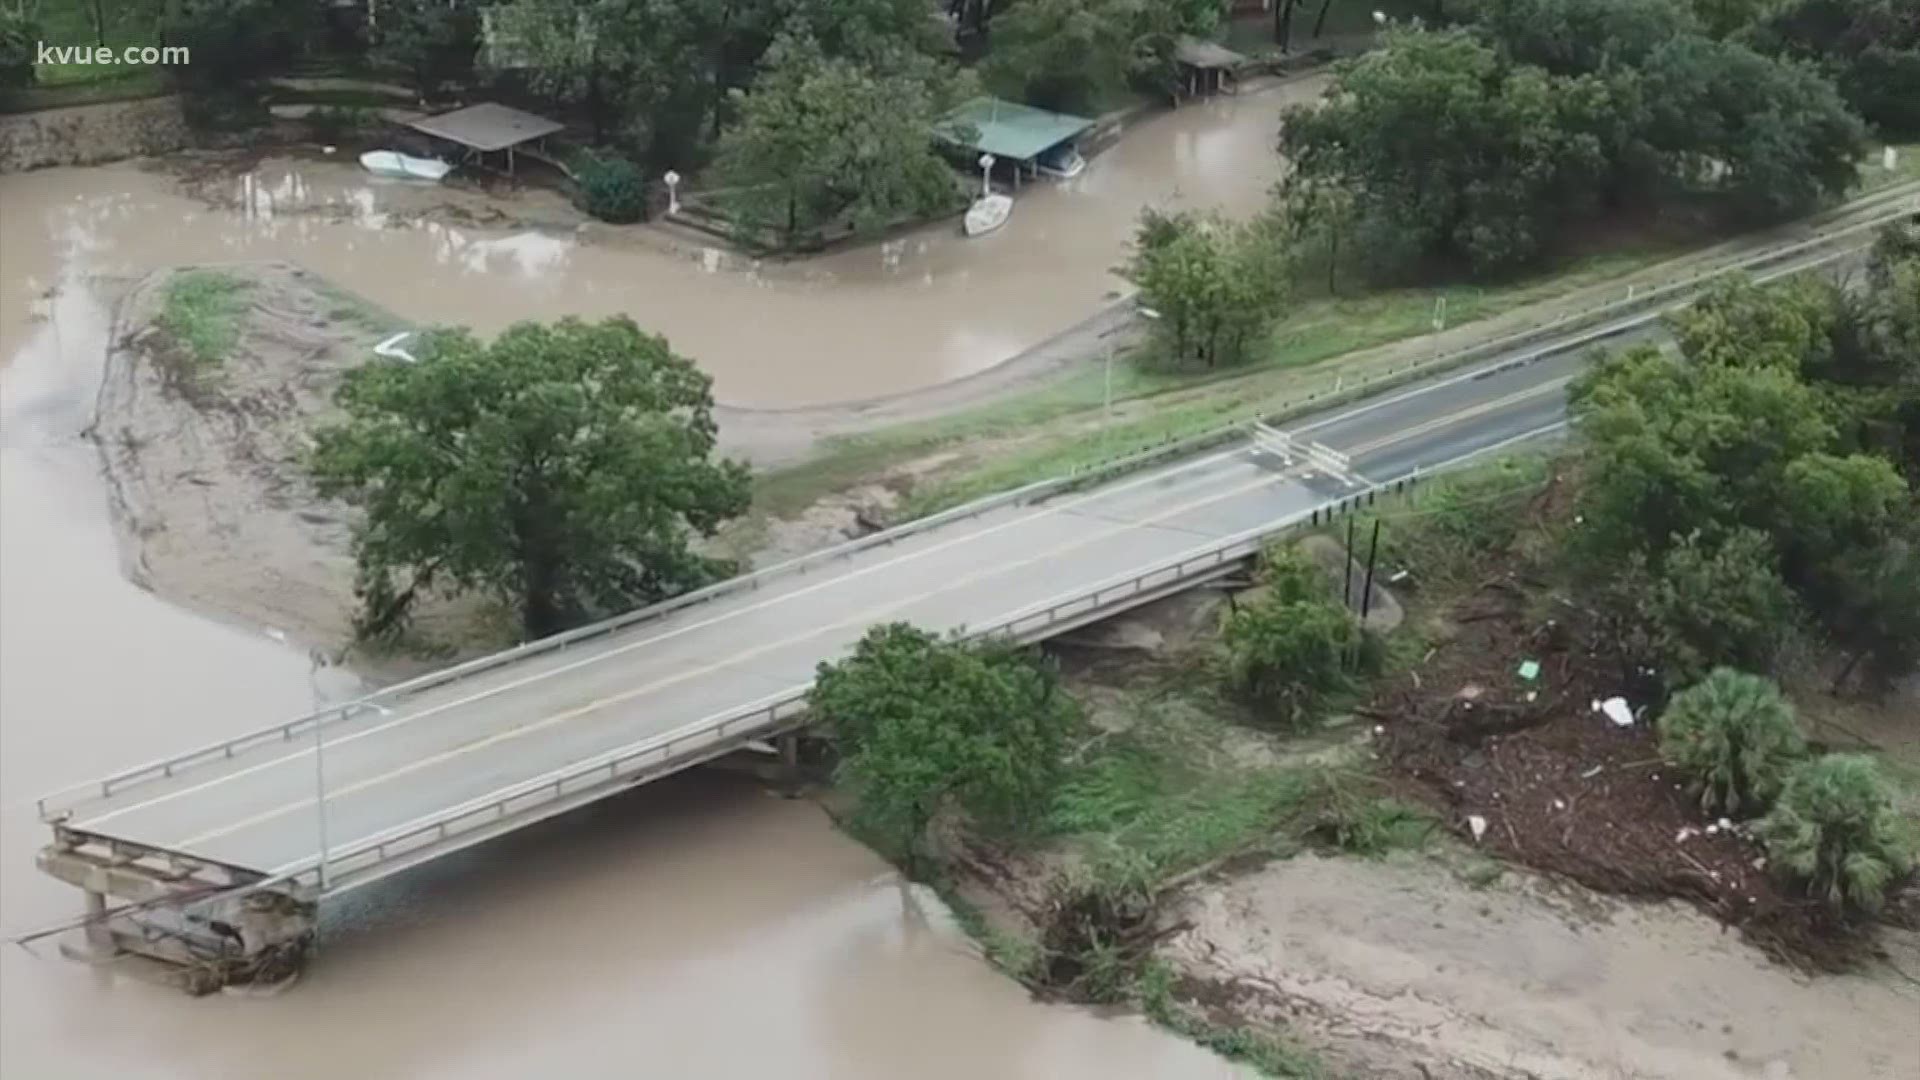 Two years ago, Llano River flooding washed away the FM 2900 bridge in Kingsland. Millions of dollars worth of damage was done in just minutes.